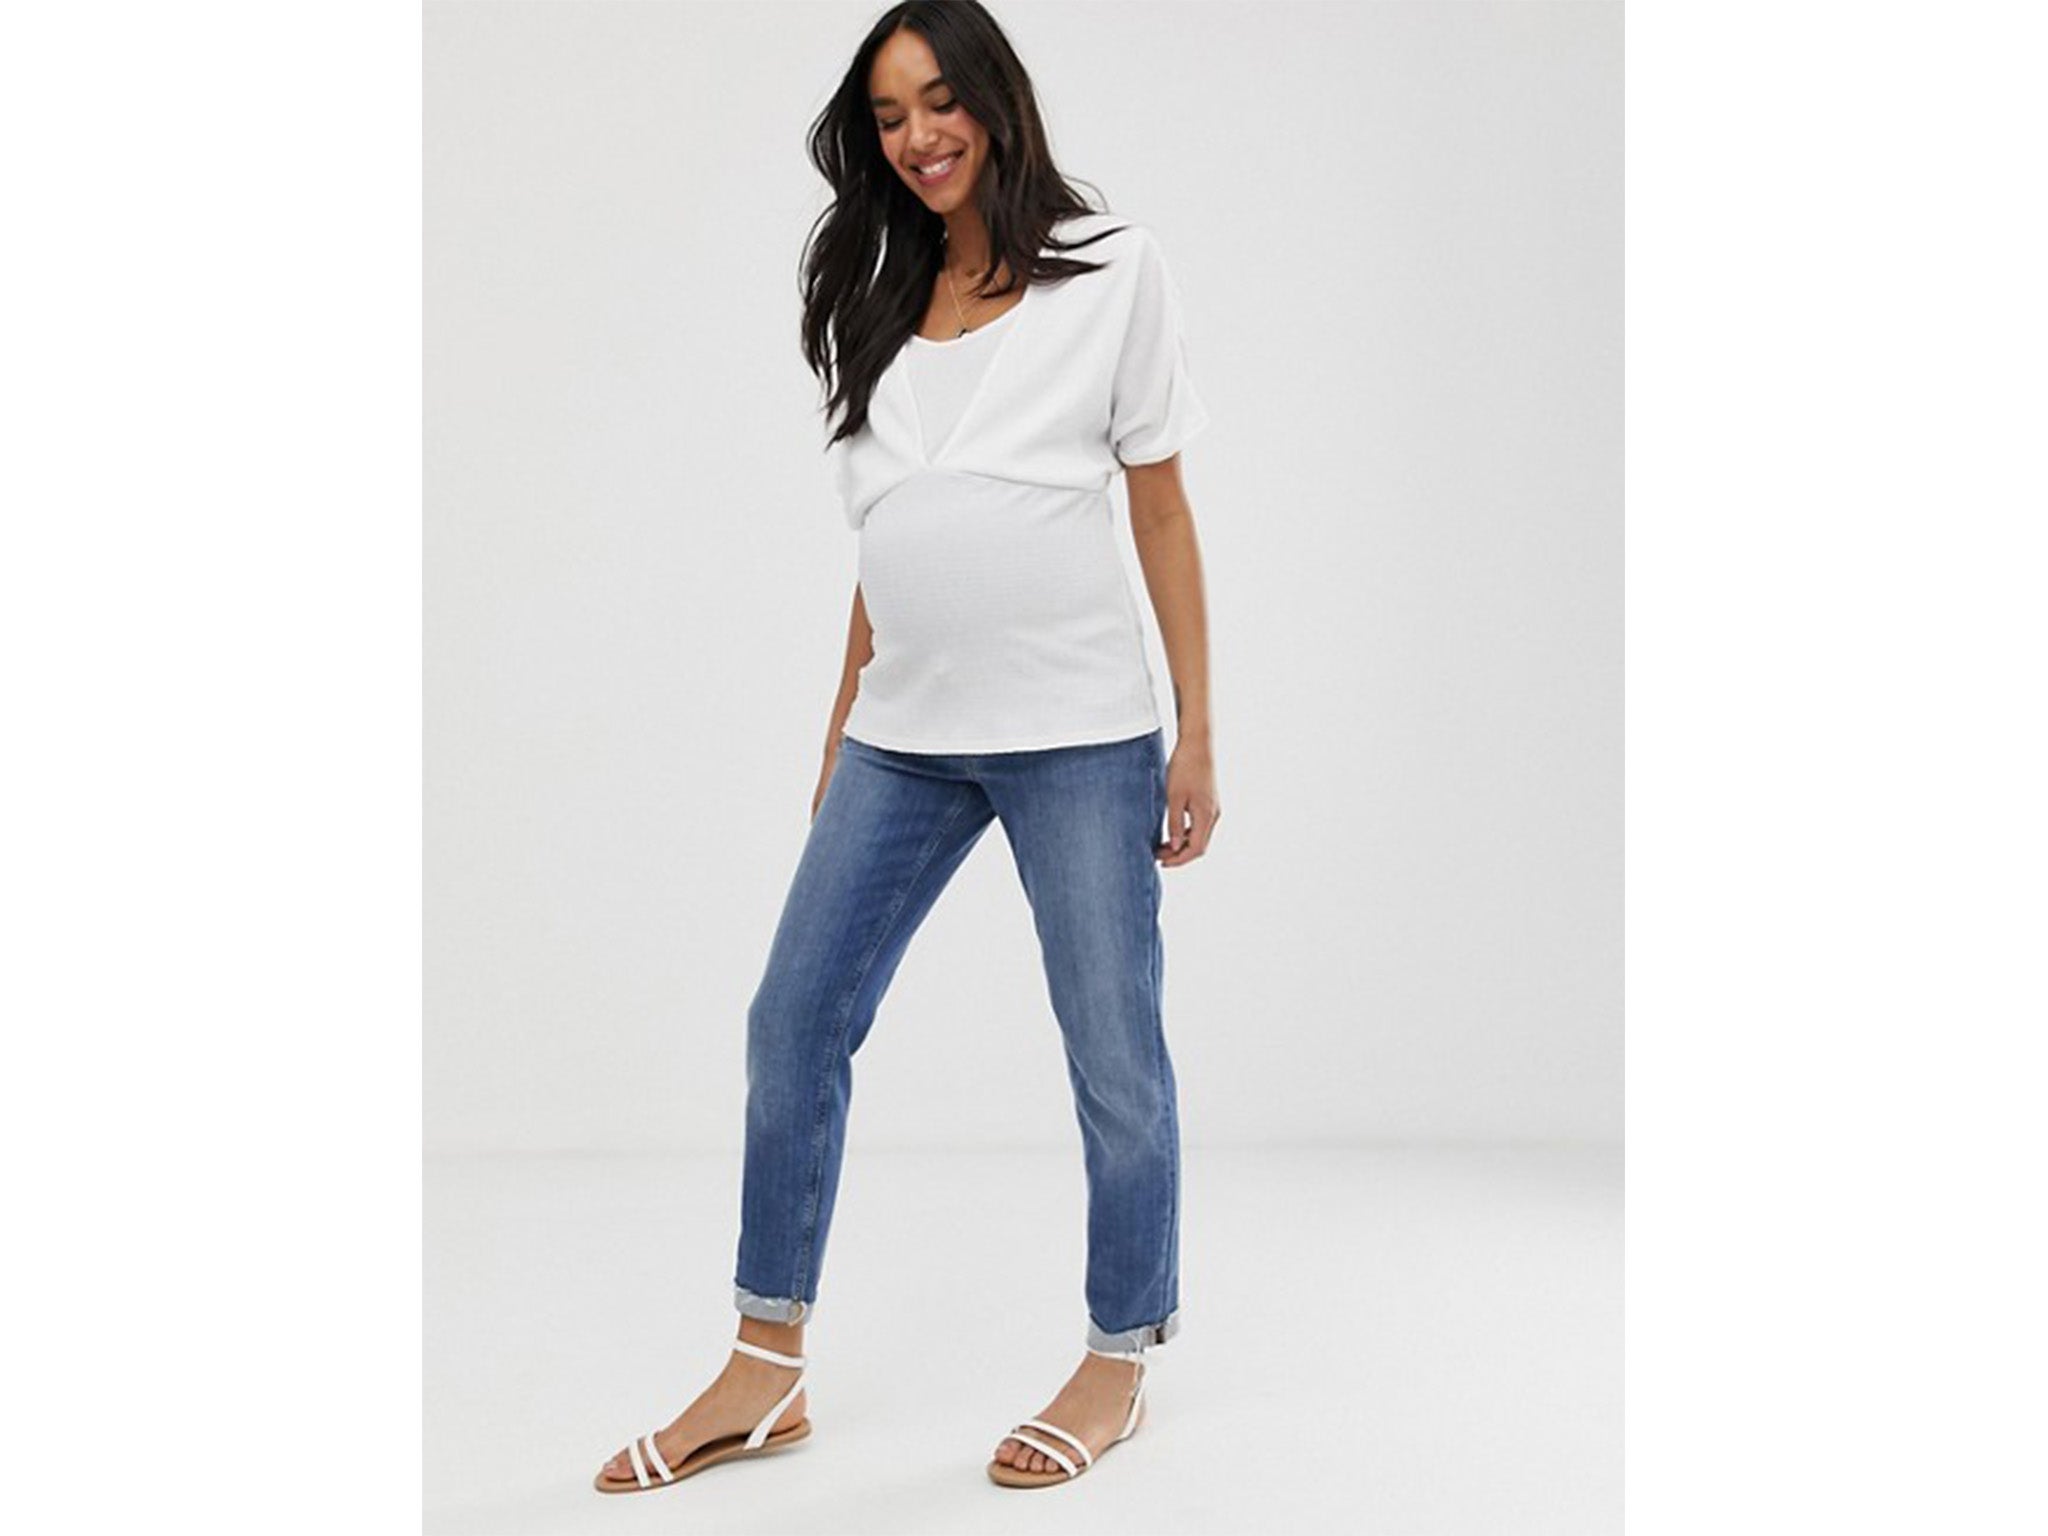 Perfect fo summer, this white top has easy access for feeding and can be dressed up or down, depending on how much time you have